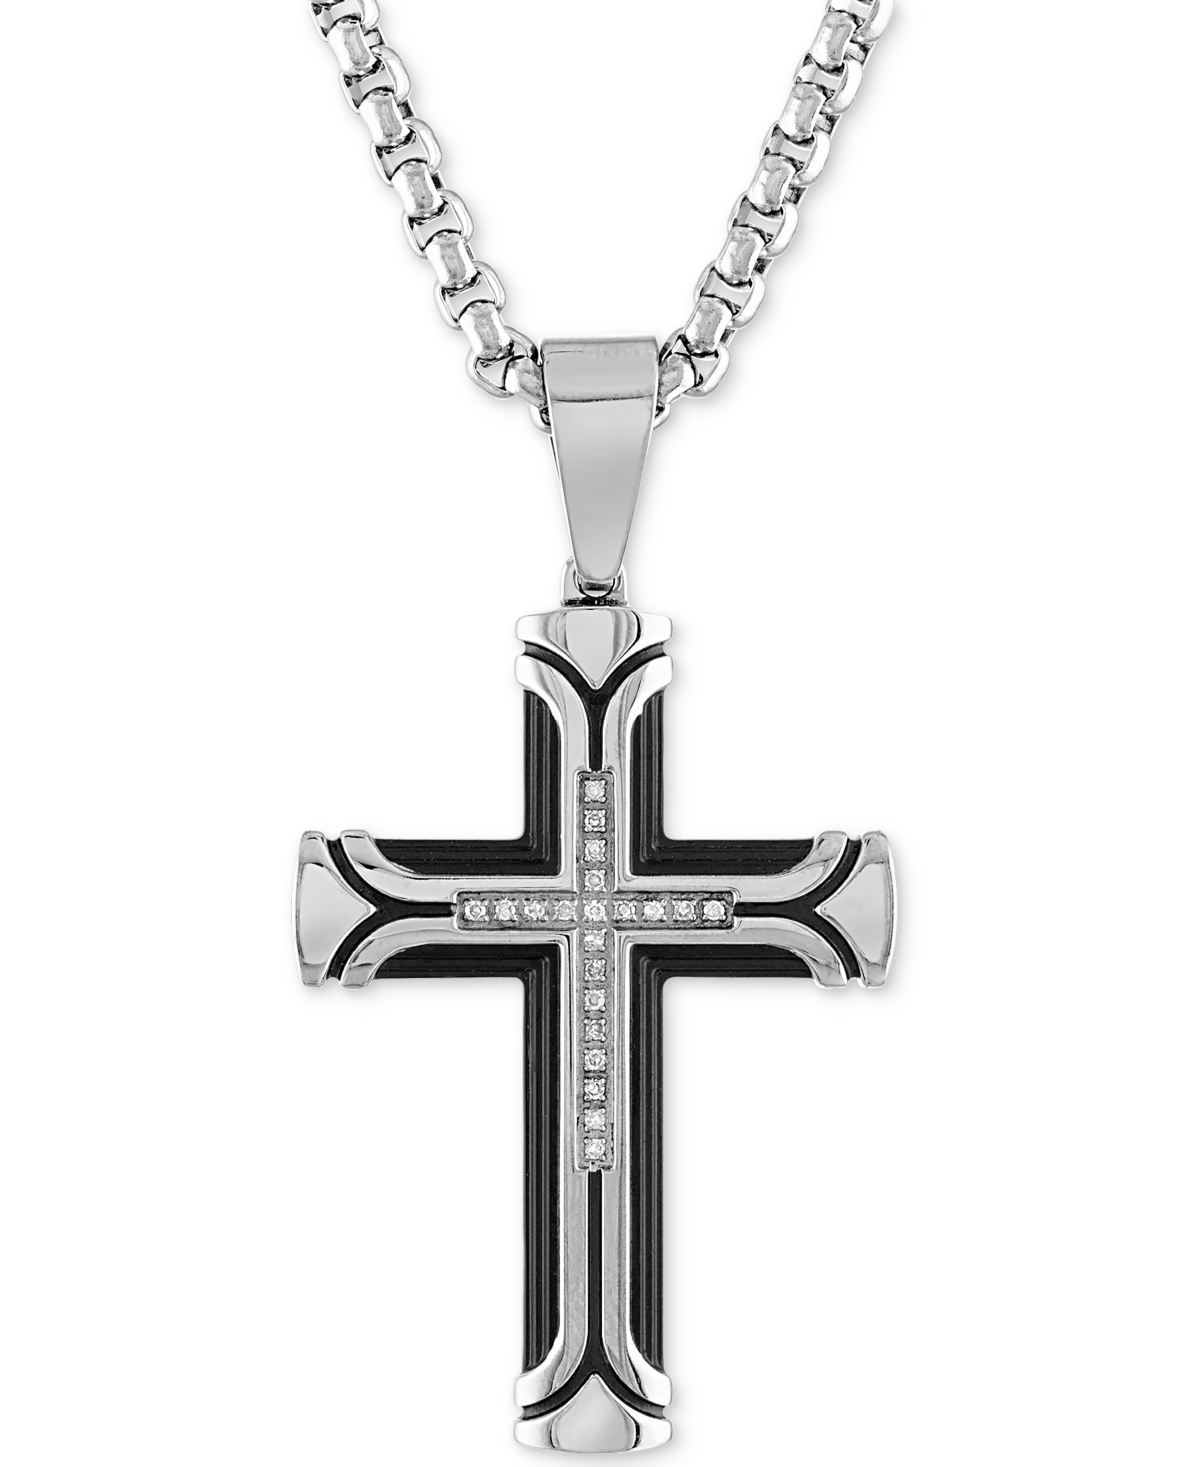 Diamond Cross 22" Pendant Necklace (1/10 ct. t.w.) in Ion-Plated Stainless Steel, Created for Macy's - Black